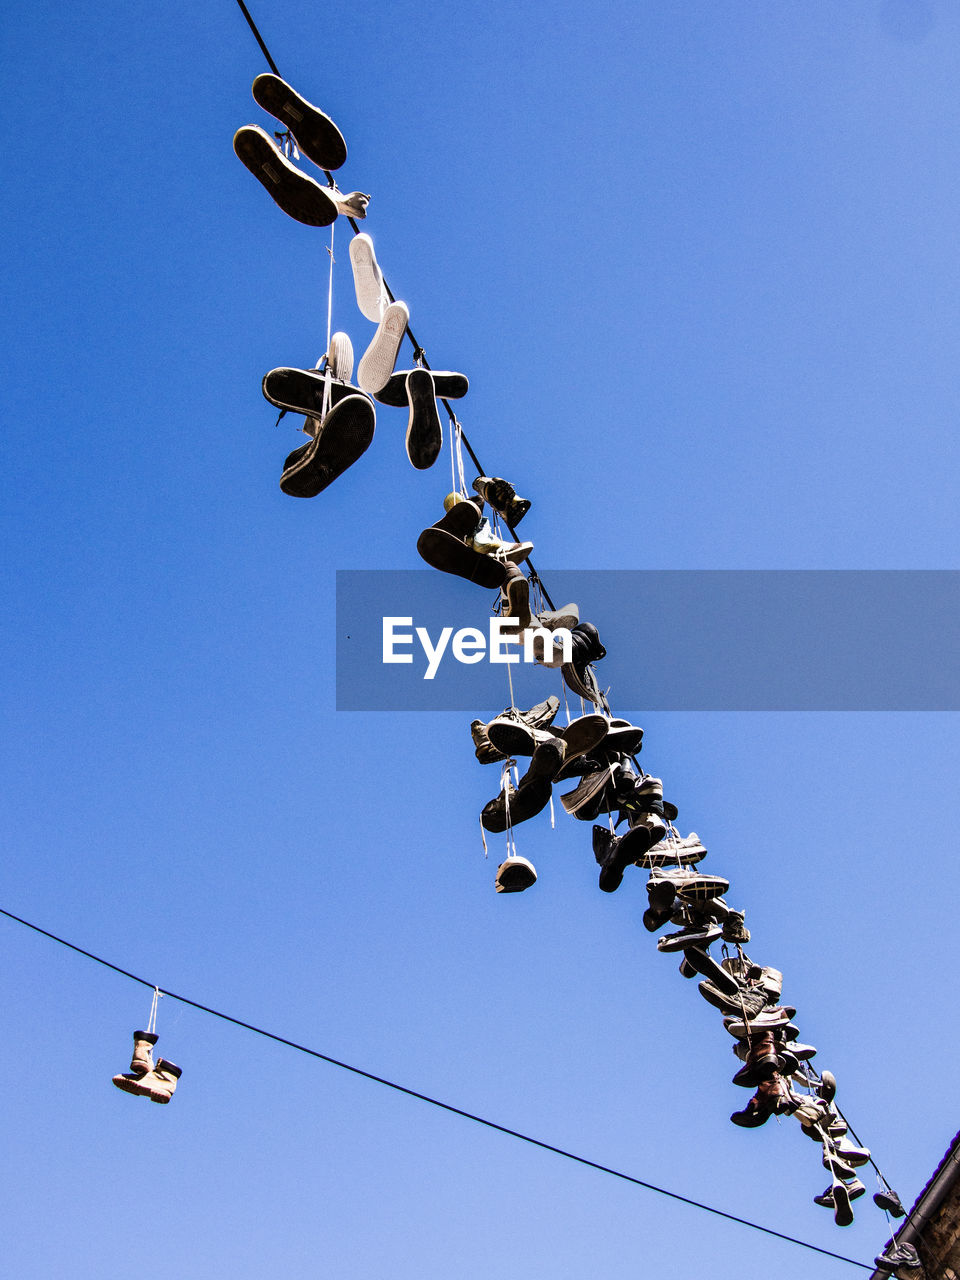 Low angle view of shoes hanging on cables against clear blue sky during sunny day